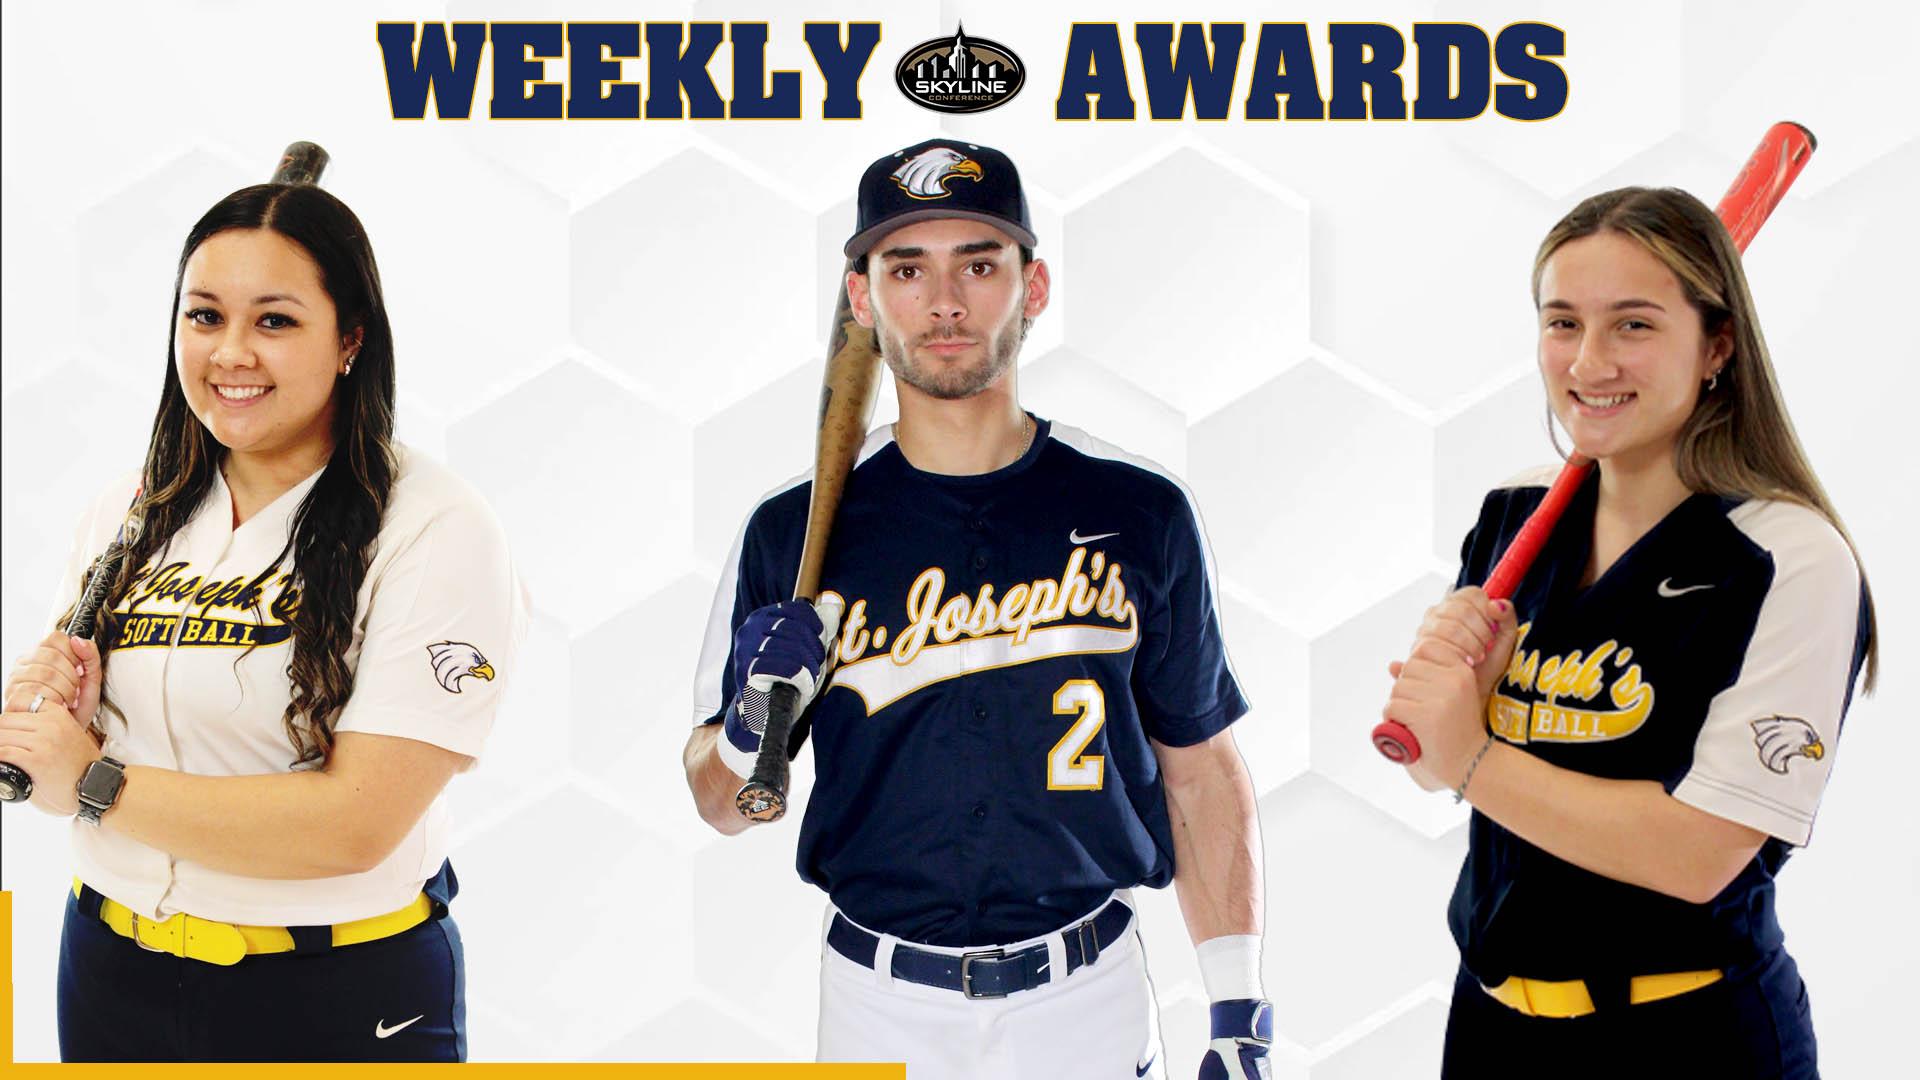 Three Golden Eagles Garner Weekly Awards; Two Land on Honor Roll